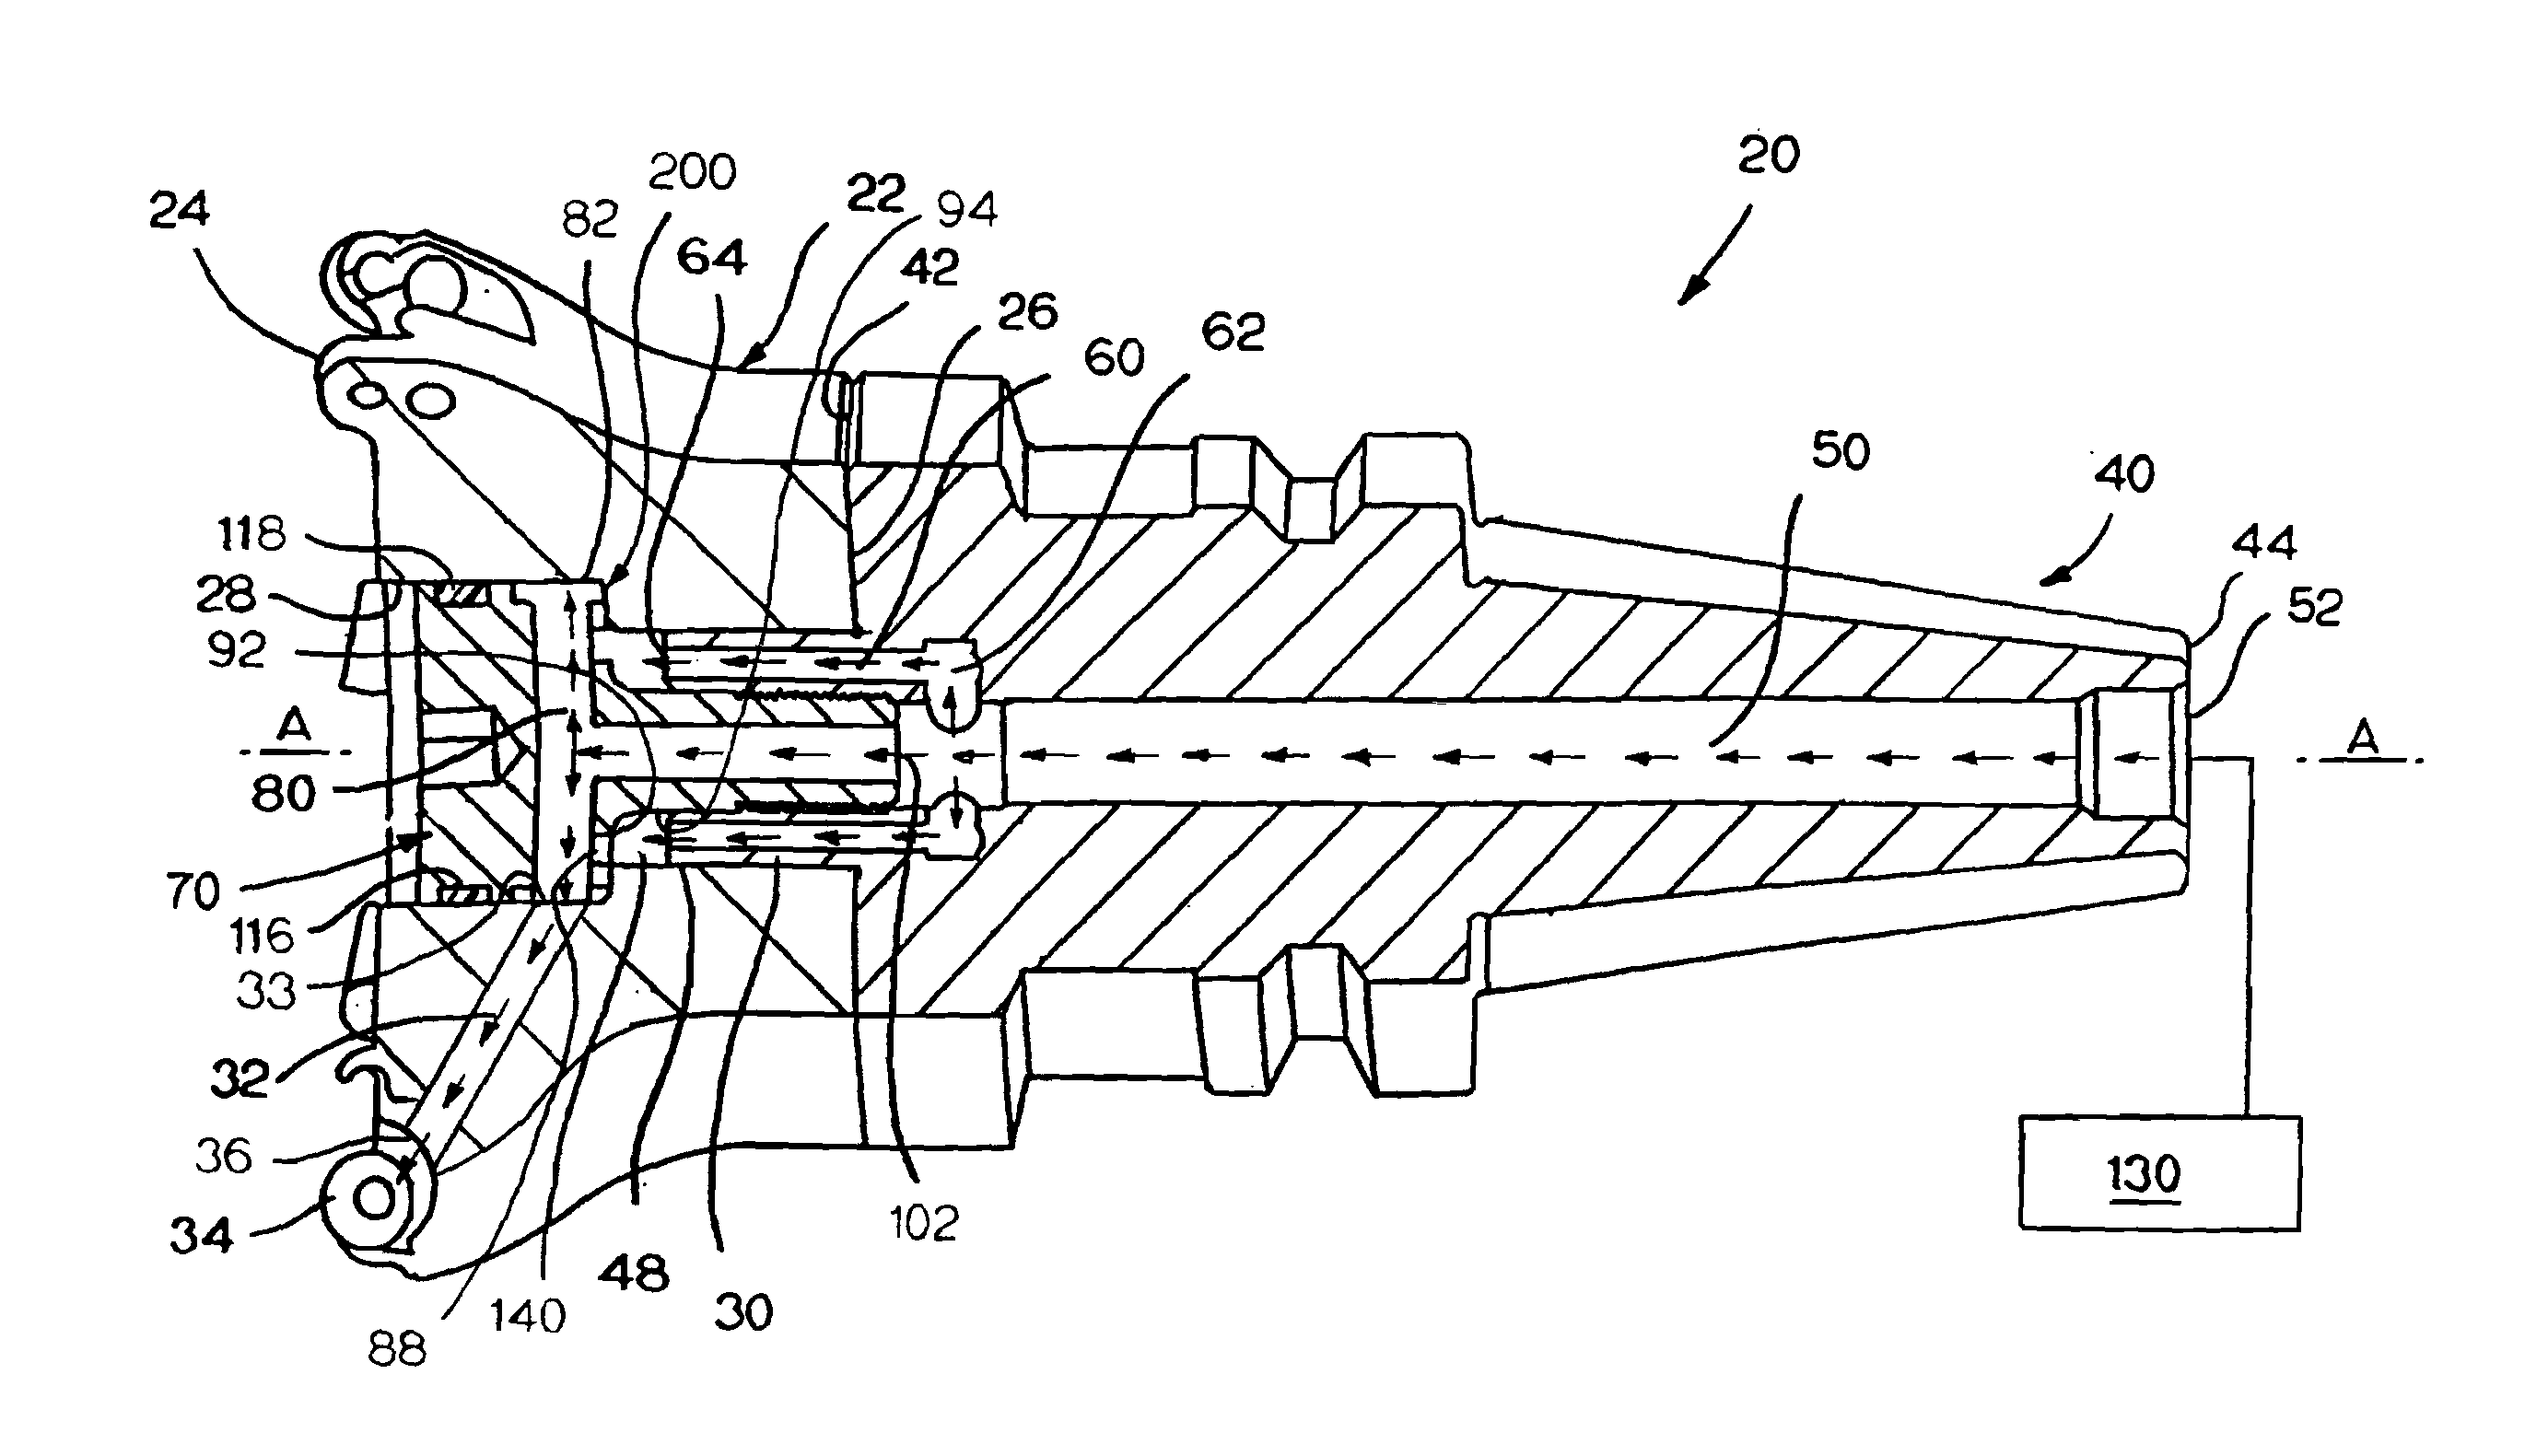 Cutting tool including a locking screw and adapter with coolant delivery